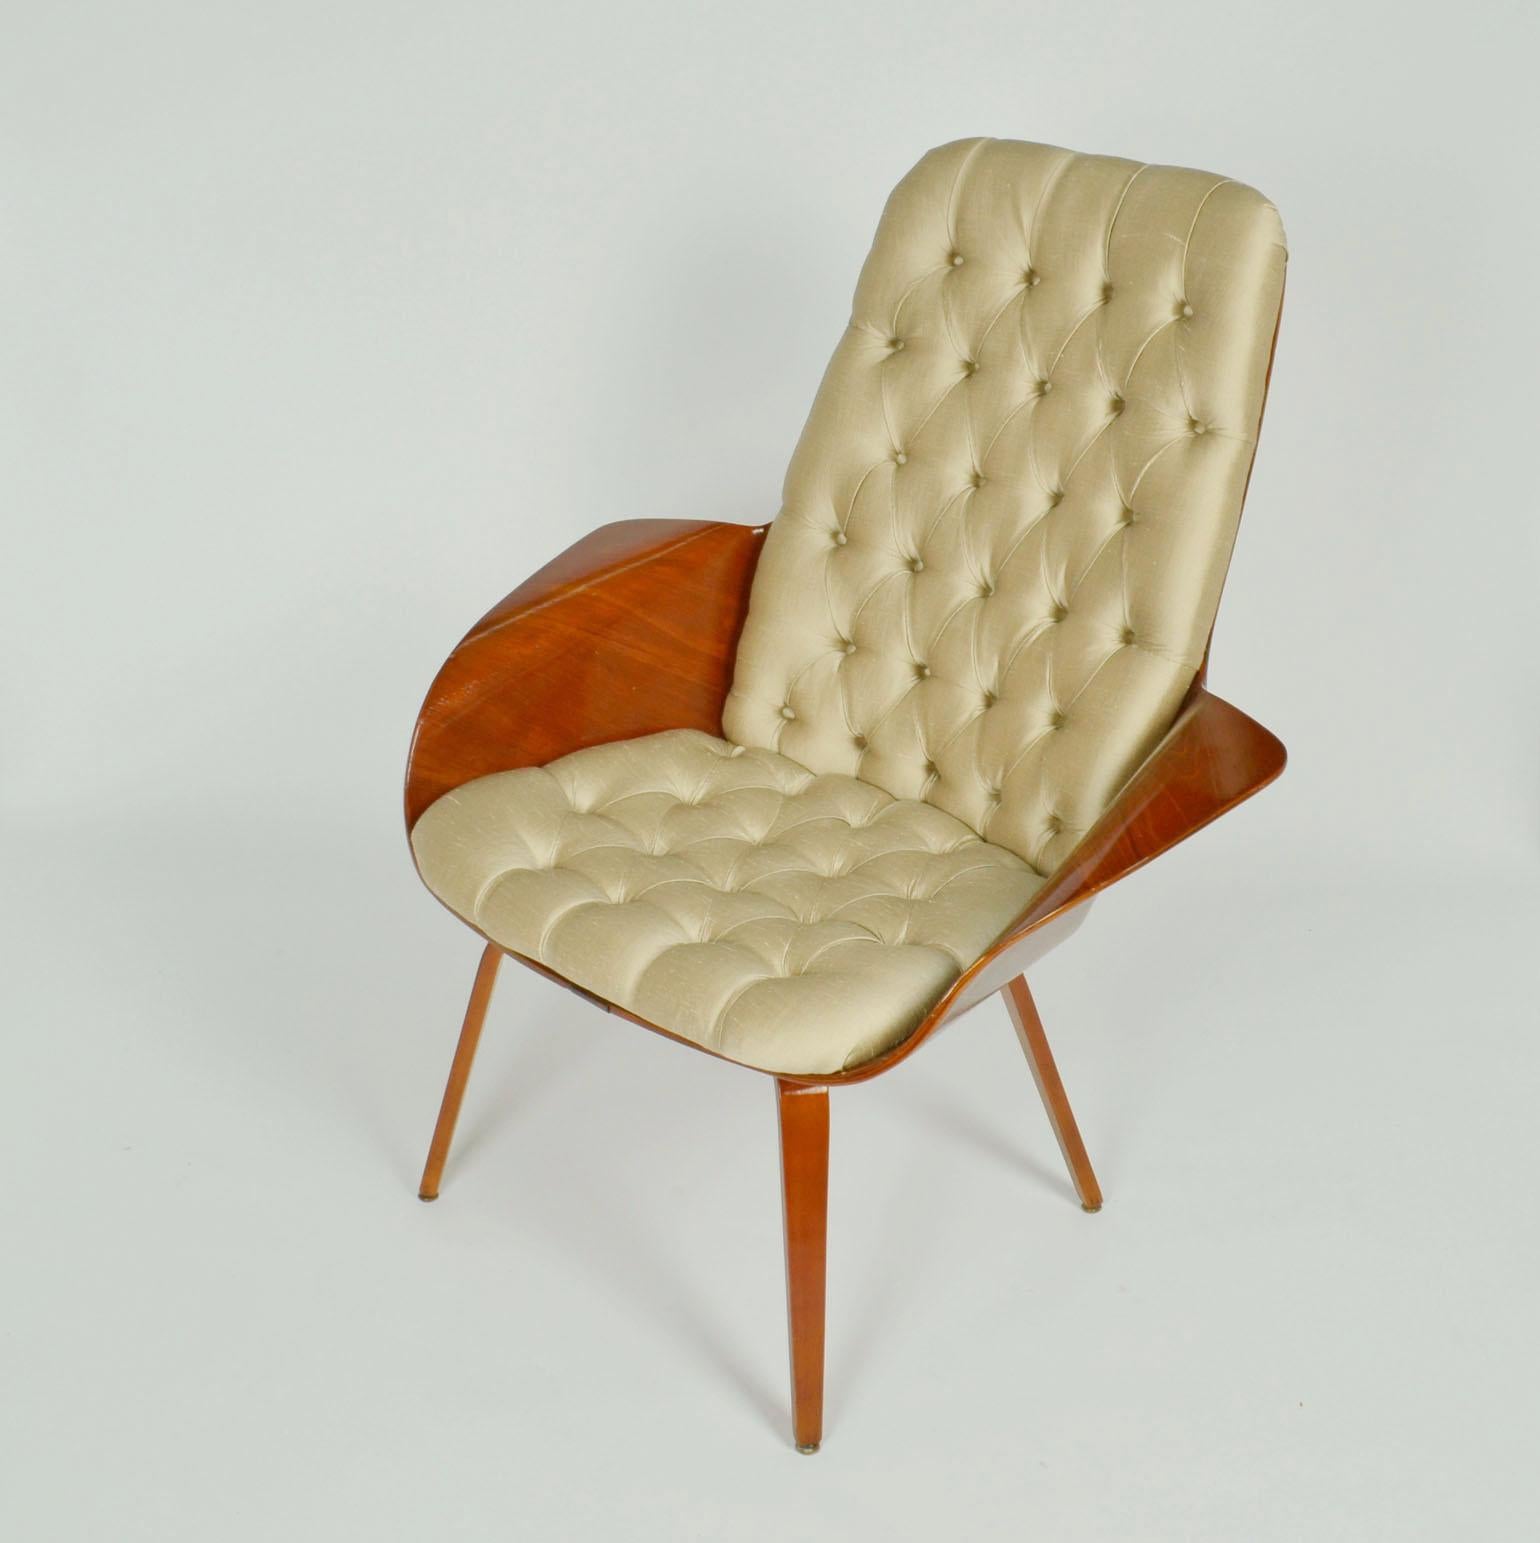 Mid-Century Modern Pair of Walnut Plywood 'Mrs' Lounge Chair by George Mulhauser for Plycraft For Sale